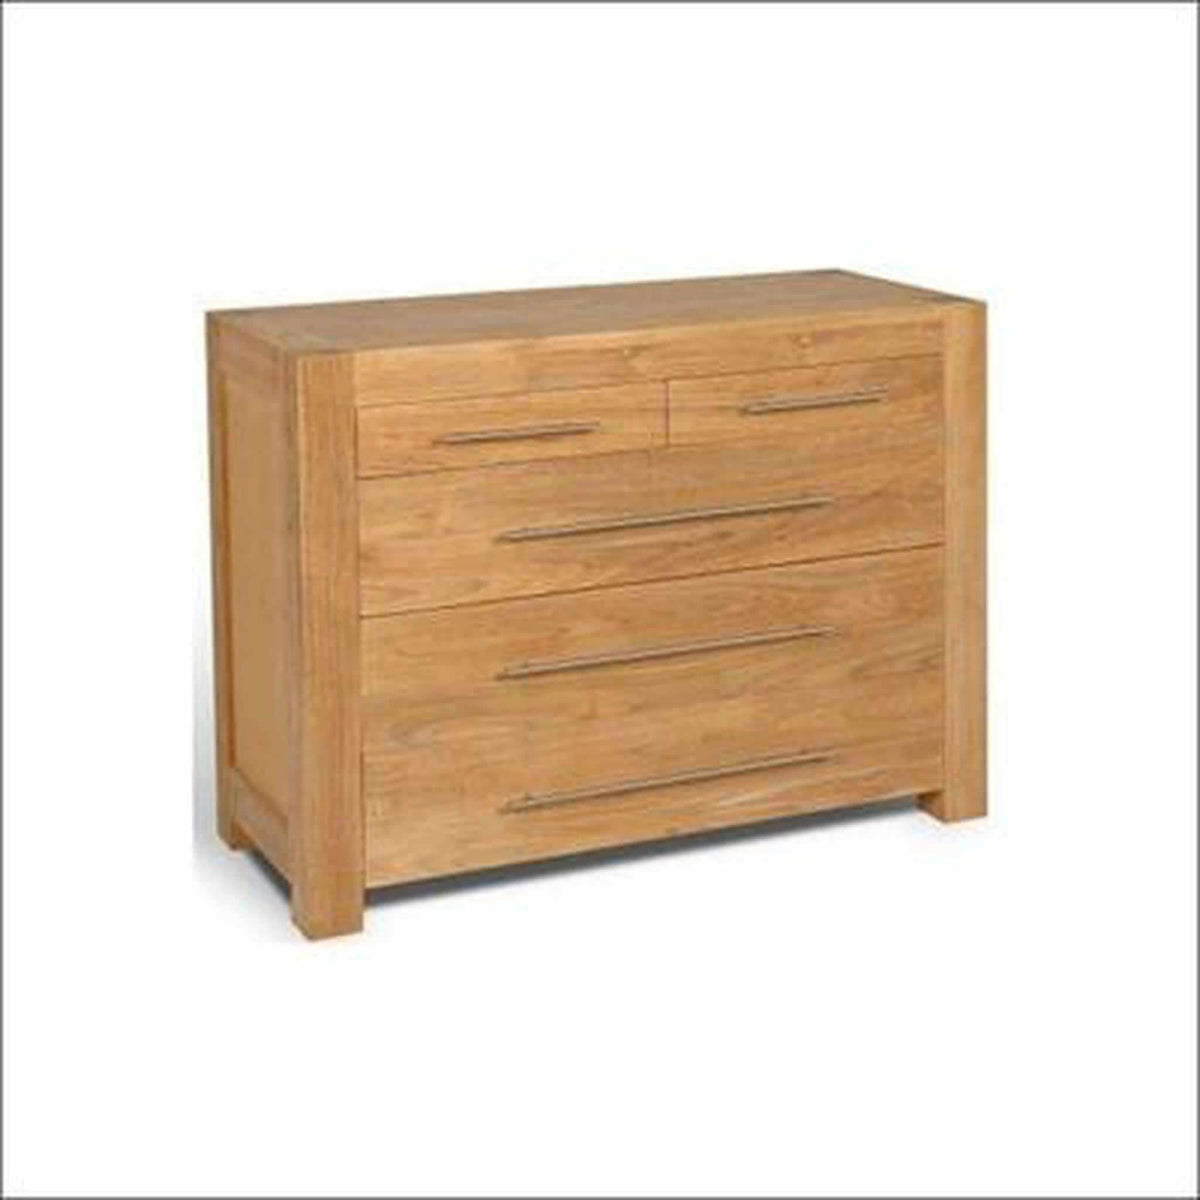 Teak chest of with 5 drawers worth of storage space - TimberCraft